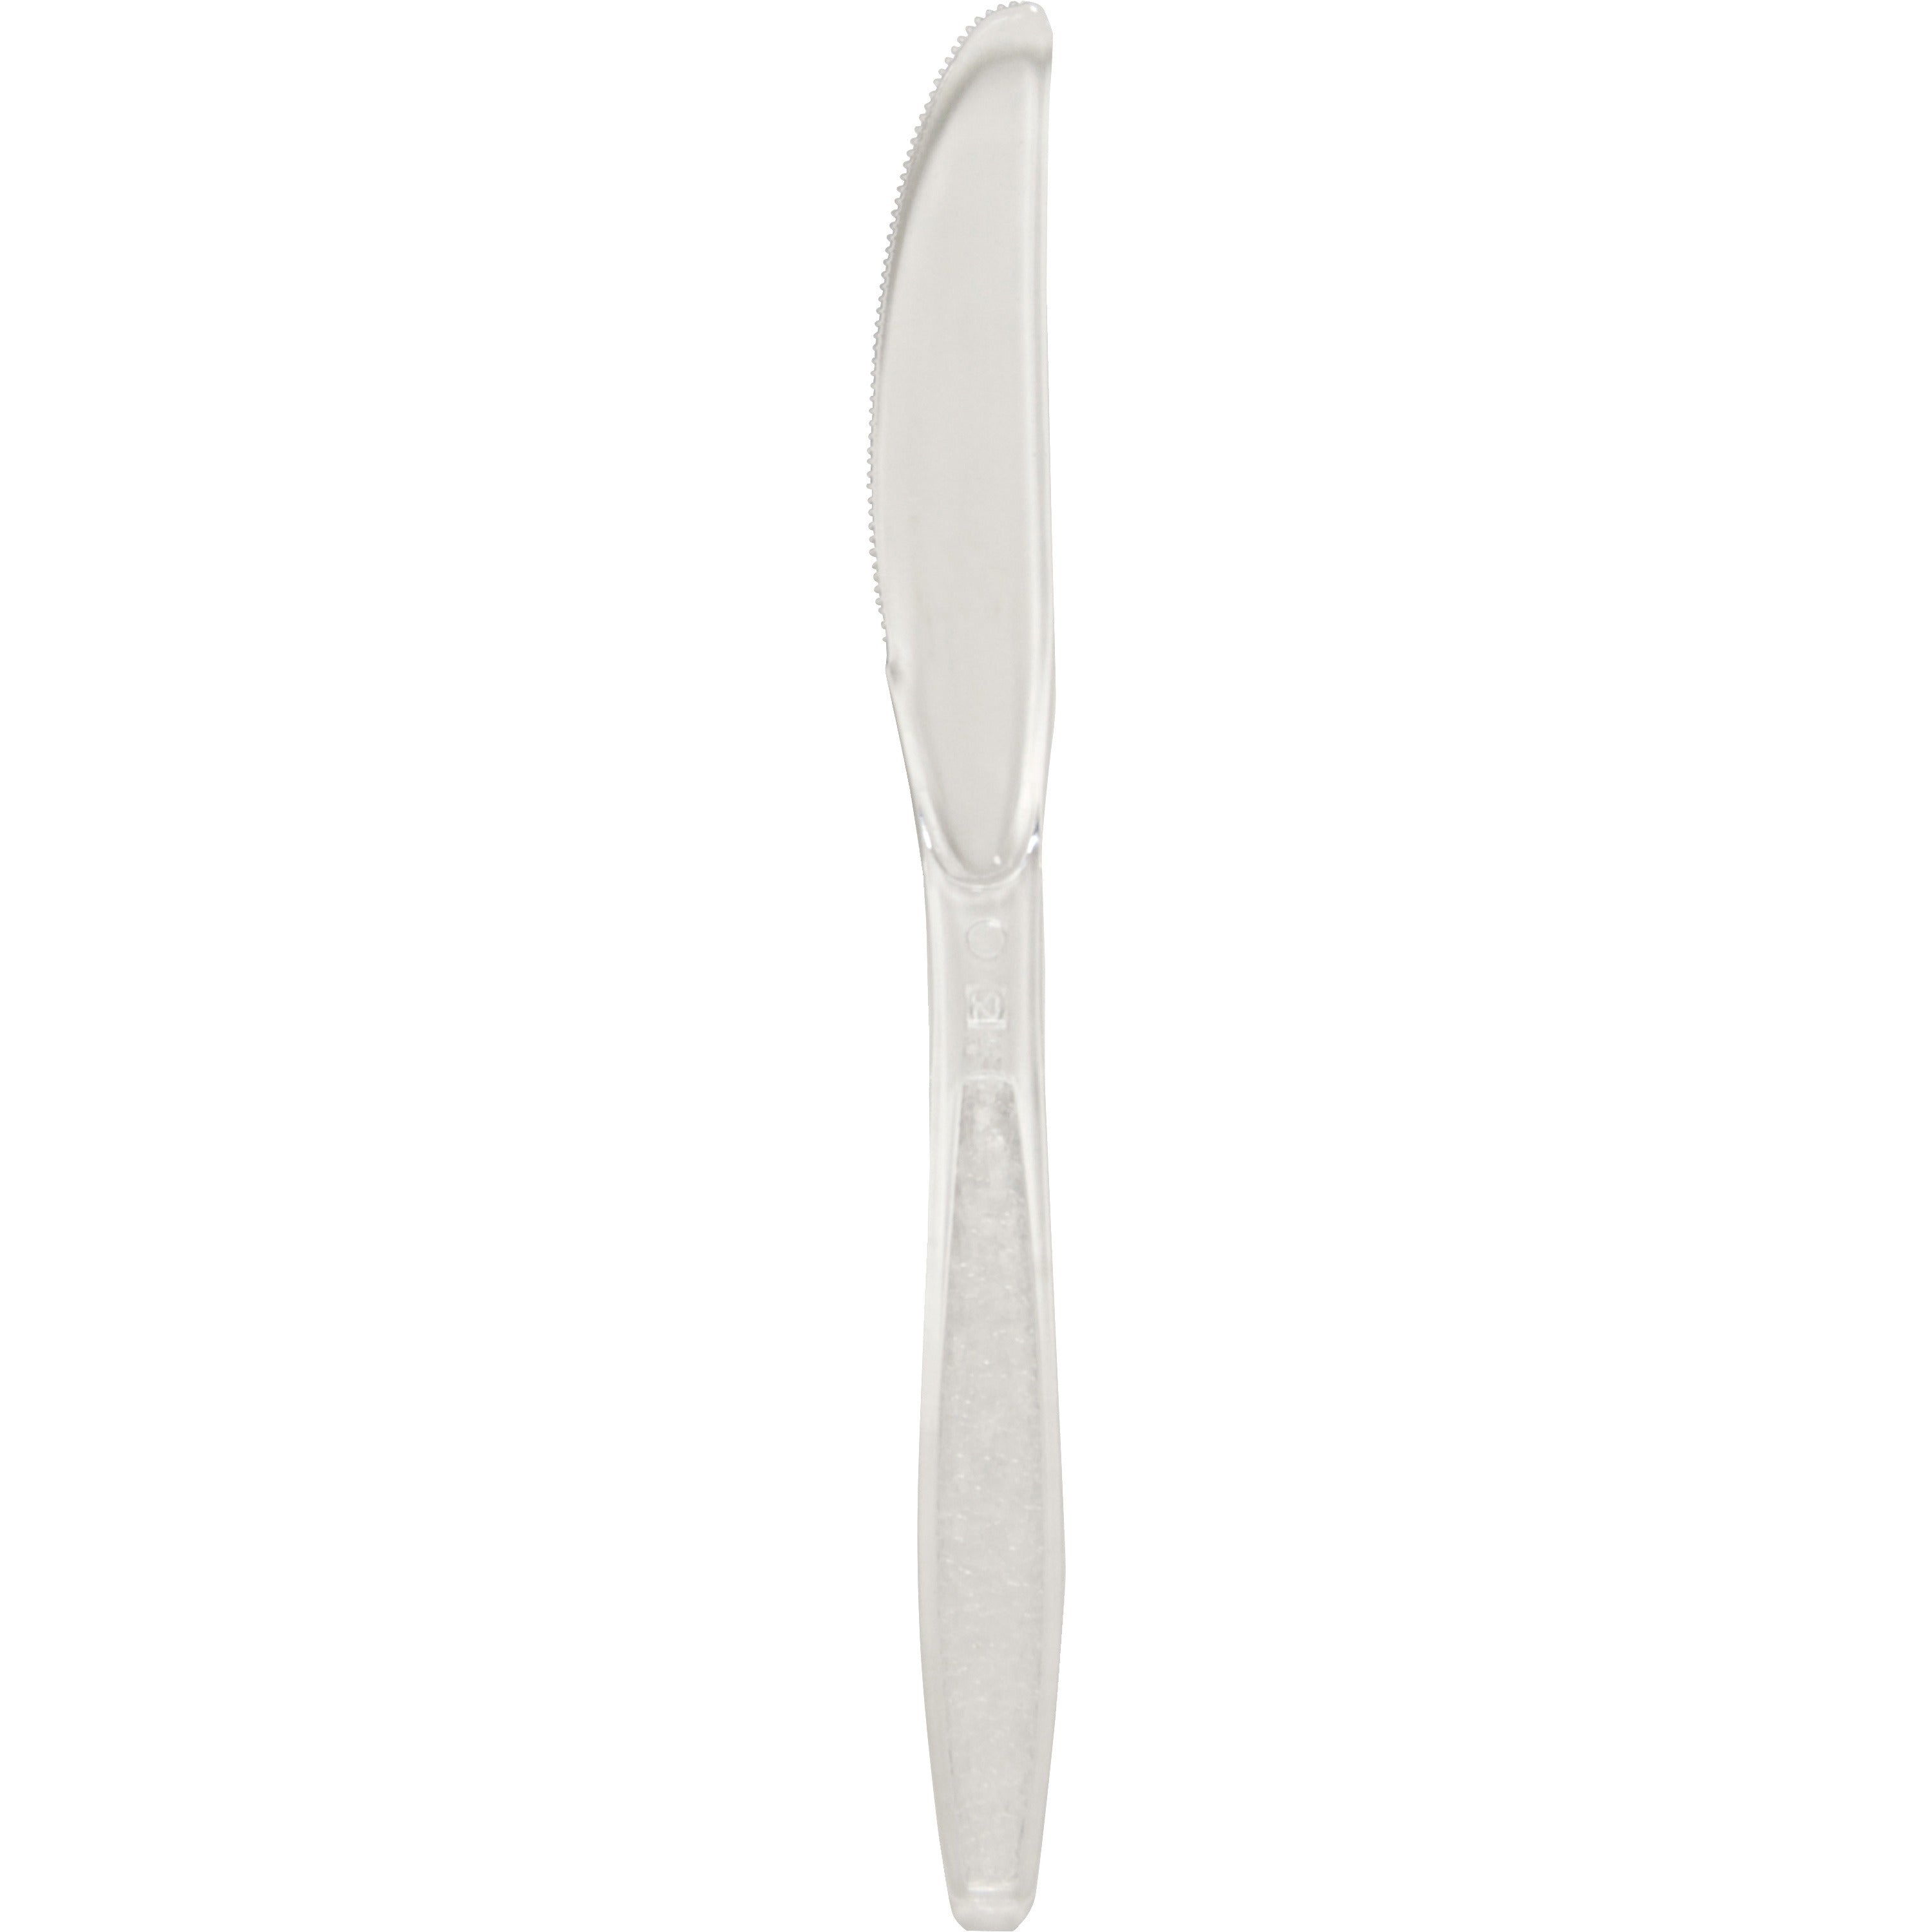 Solo Extra Heavyweight Cutlery - 1000/Carton - Knife - 1 x Knife - Breakroom - Disposable - Textured - Clear